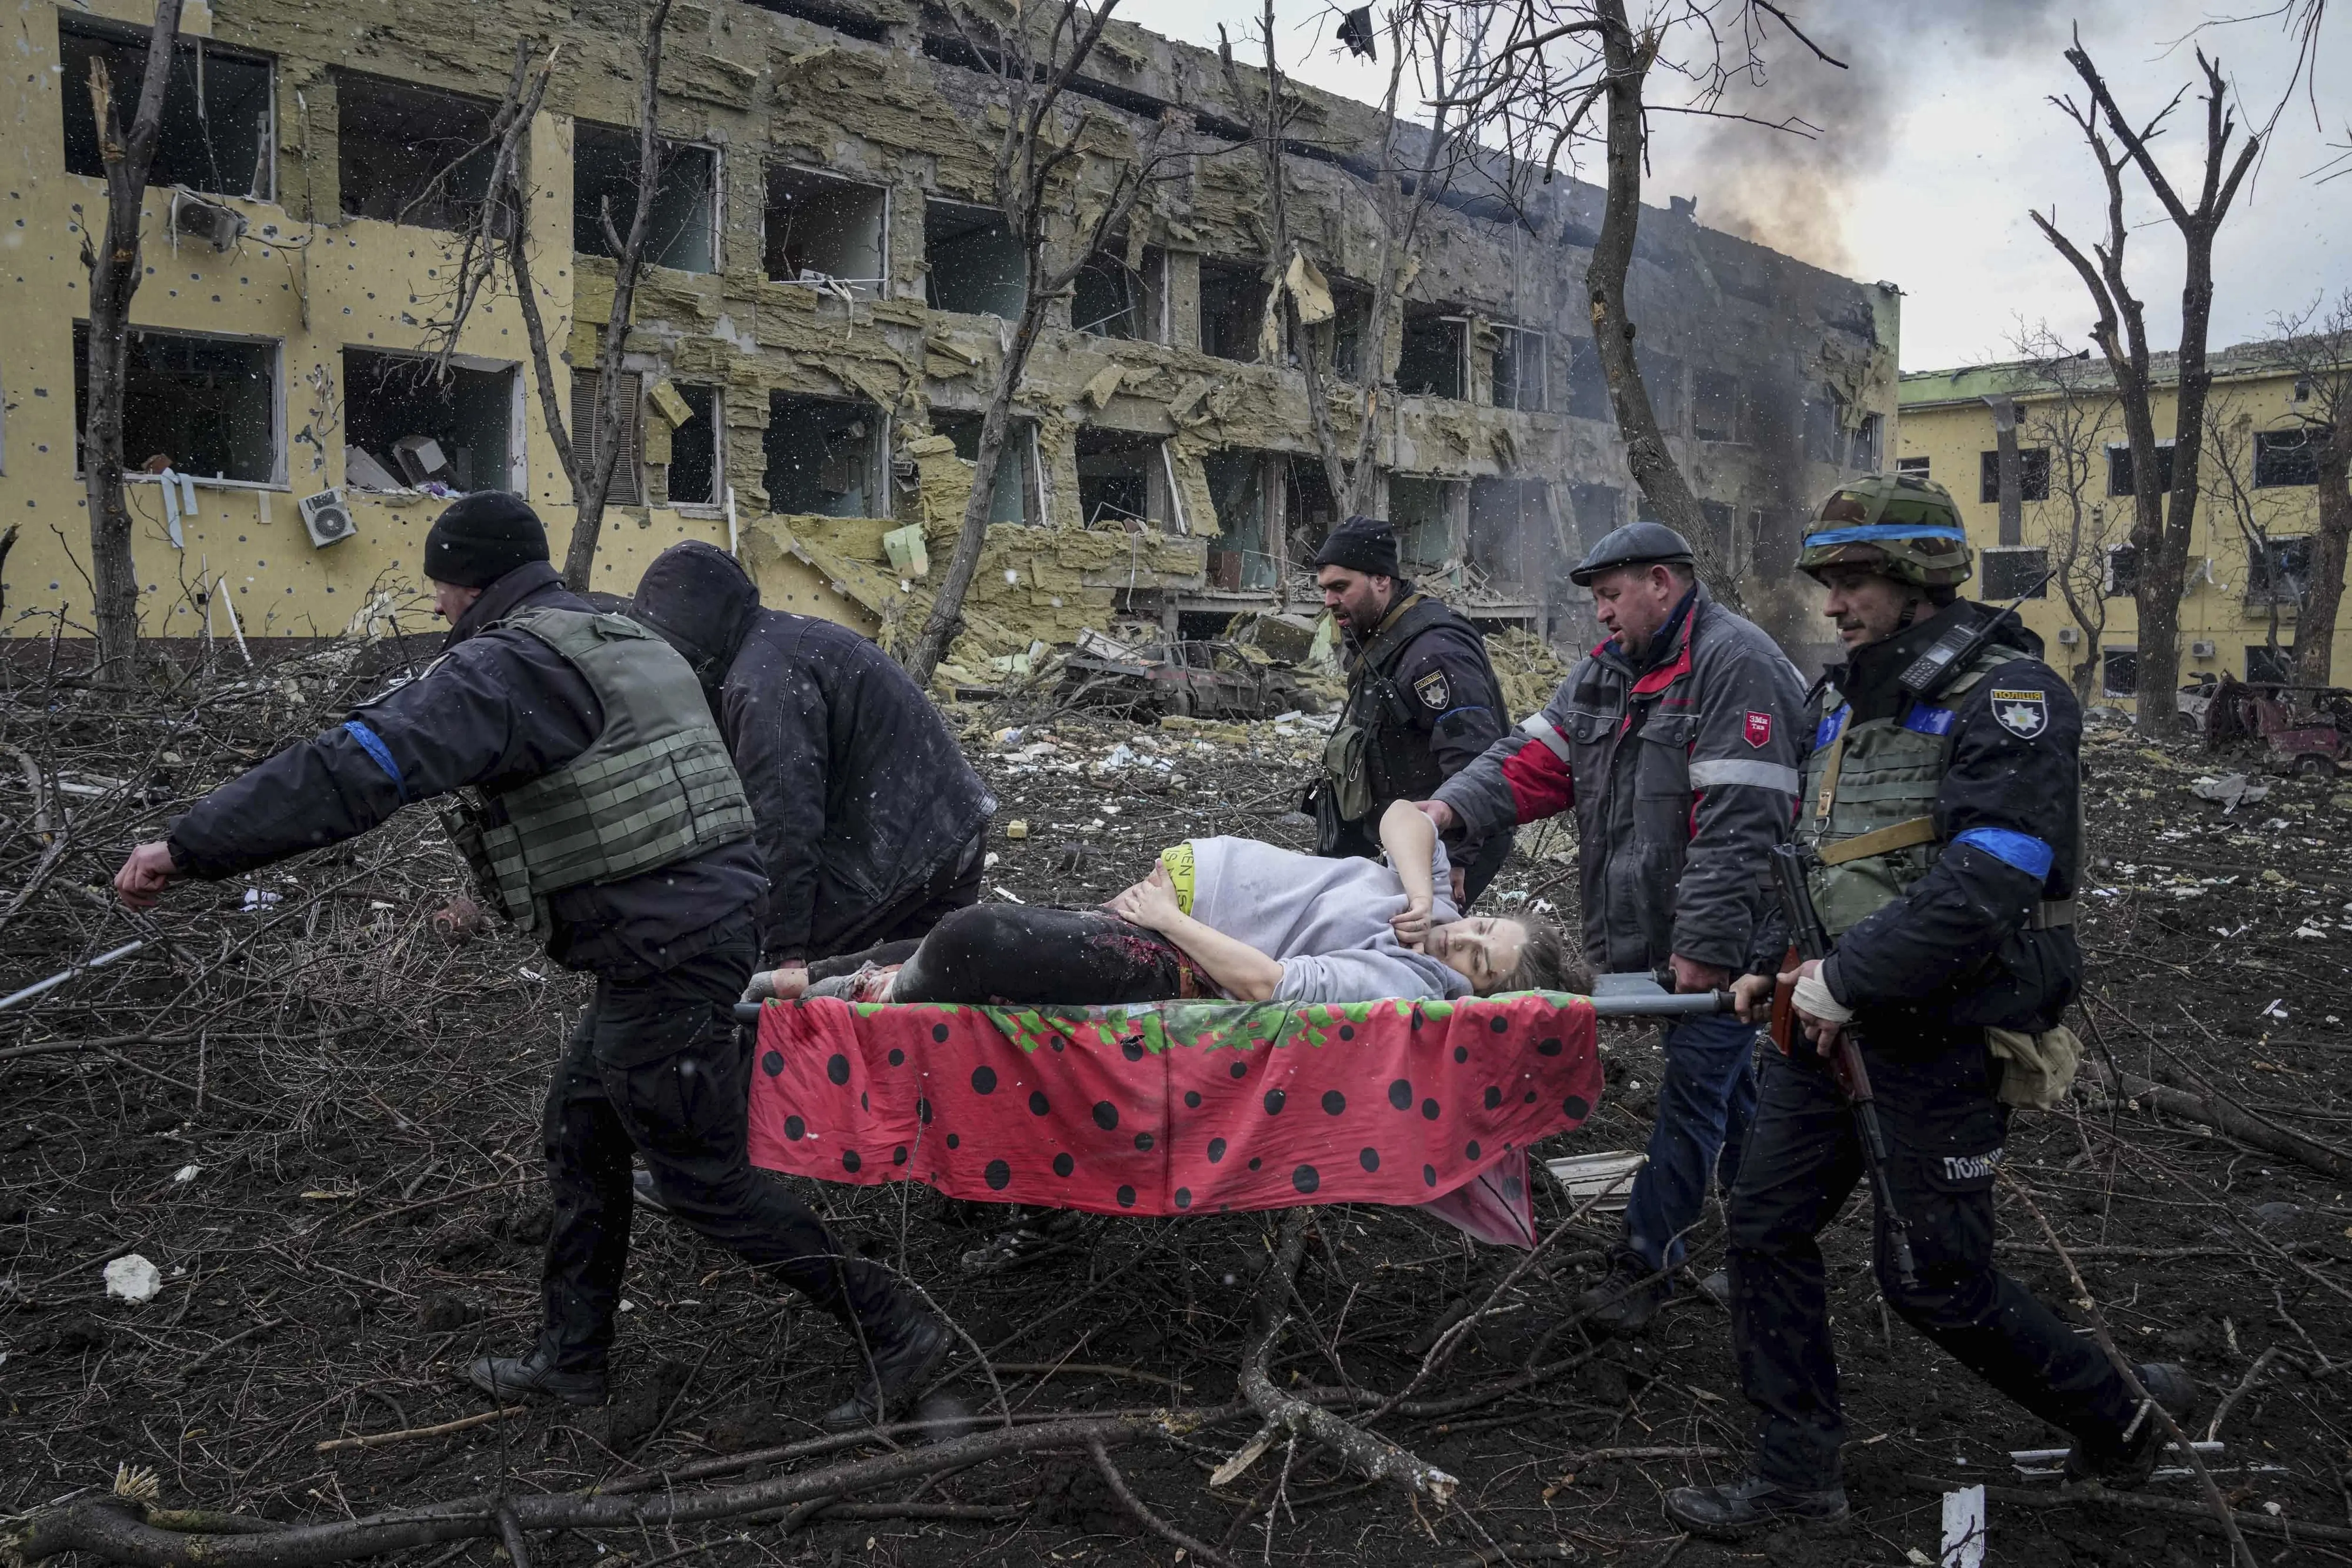 A pregnant woman is carried on a stretcher by five men amid smoking rubble and a bombed out two-story building in the background with charred trees.